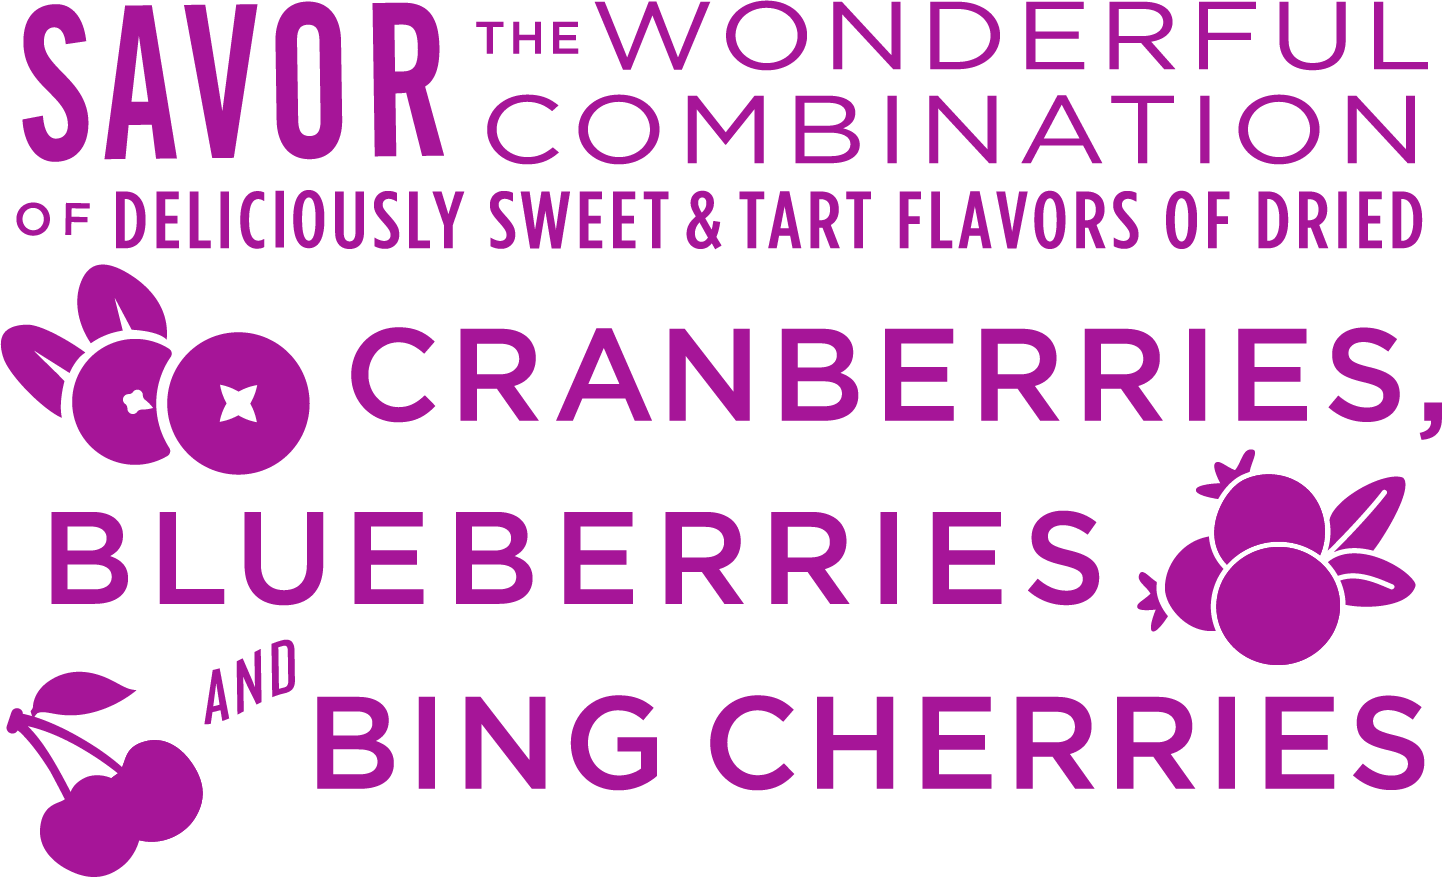 Savor the wonderful combination of deliciously sweet and tart flavors of dried cranberries, blueberries, and bing cherries.